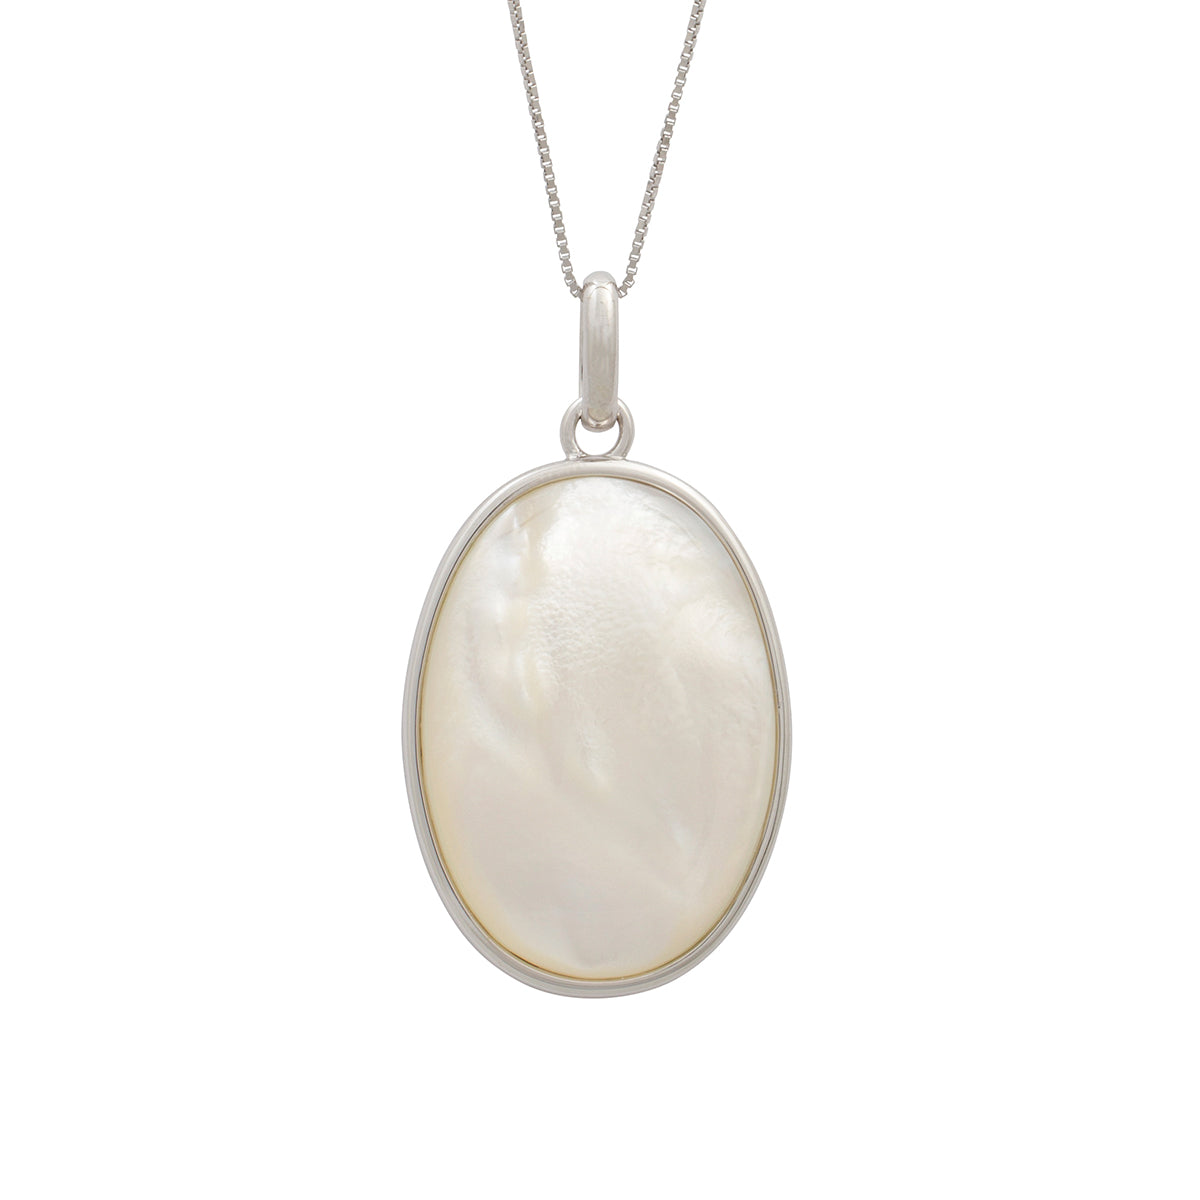 Mother of Pearl Virgin Mary Necklace – Forever Golden